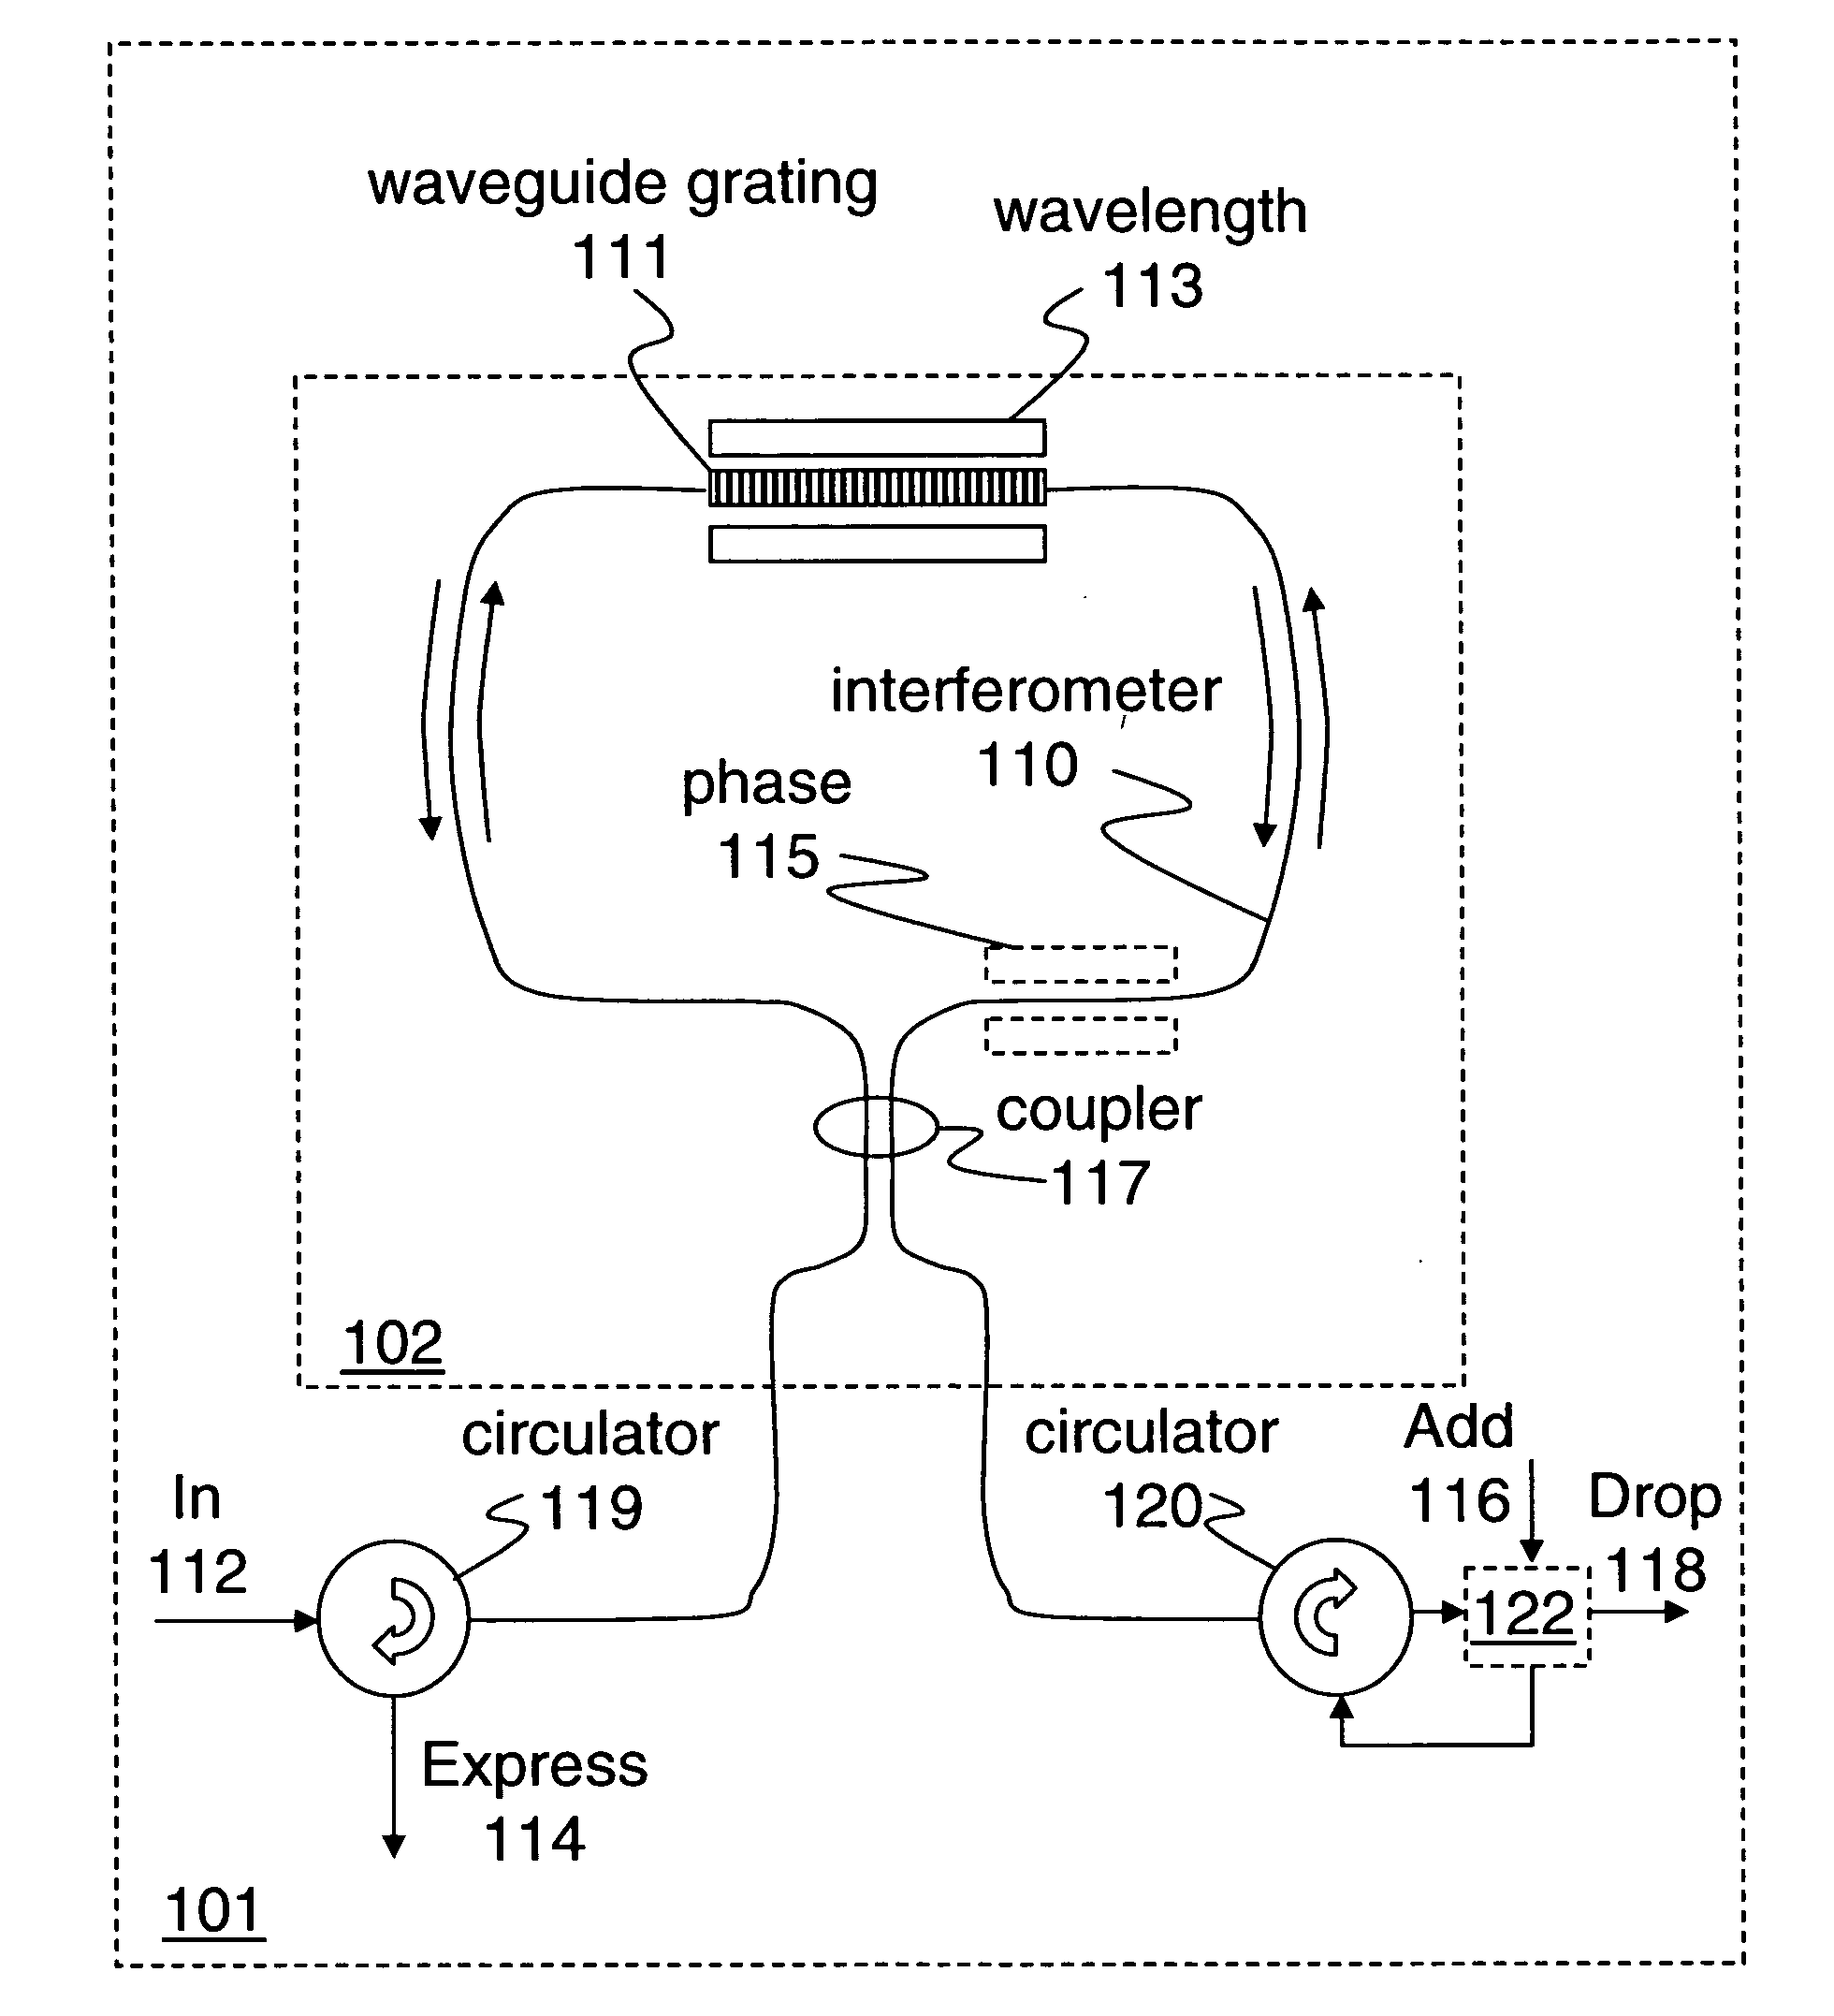 Hitless variable-reflective tunable optical filter